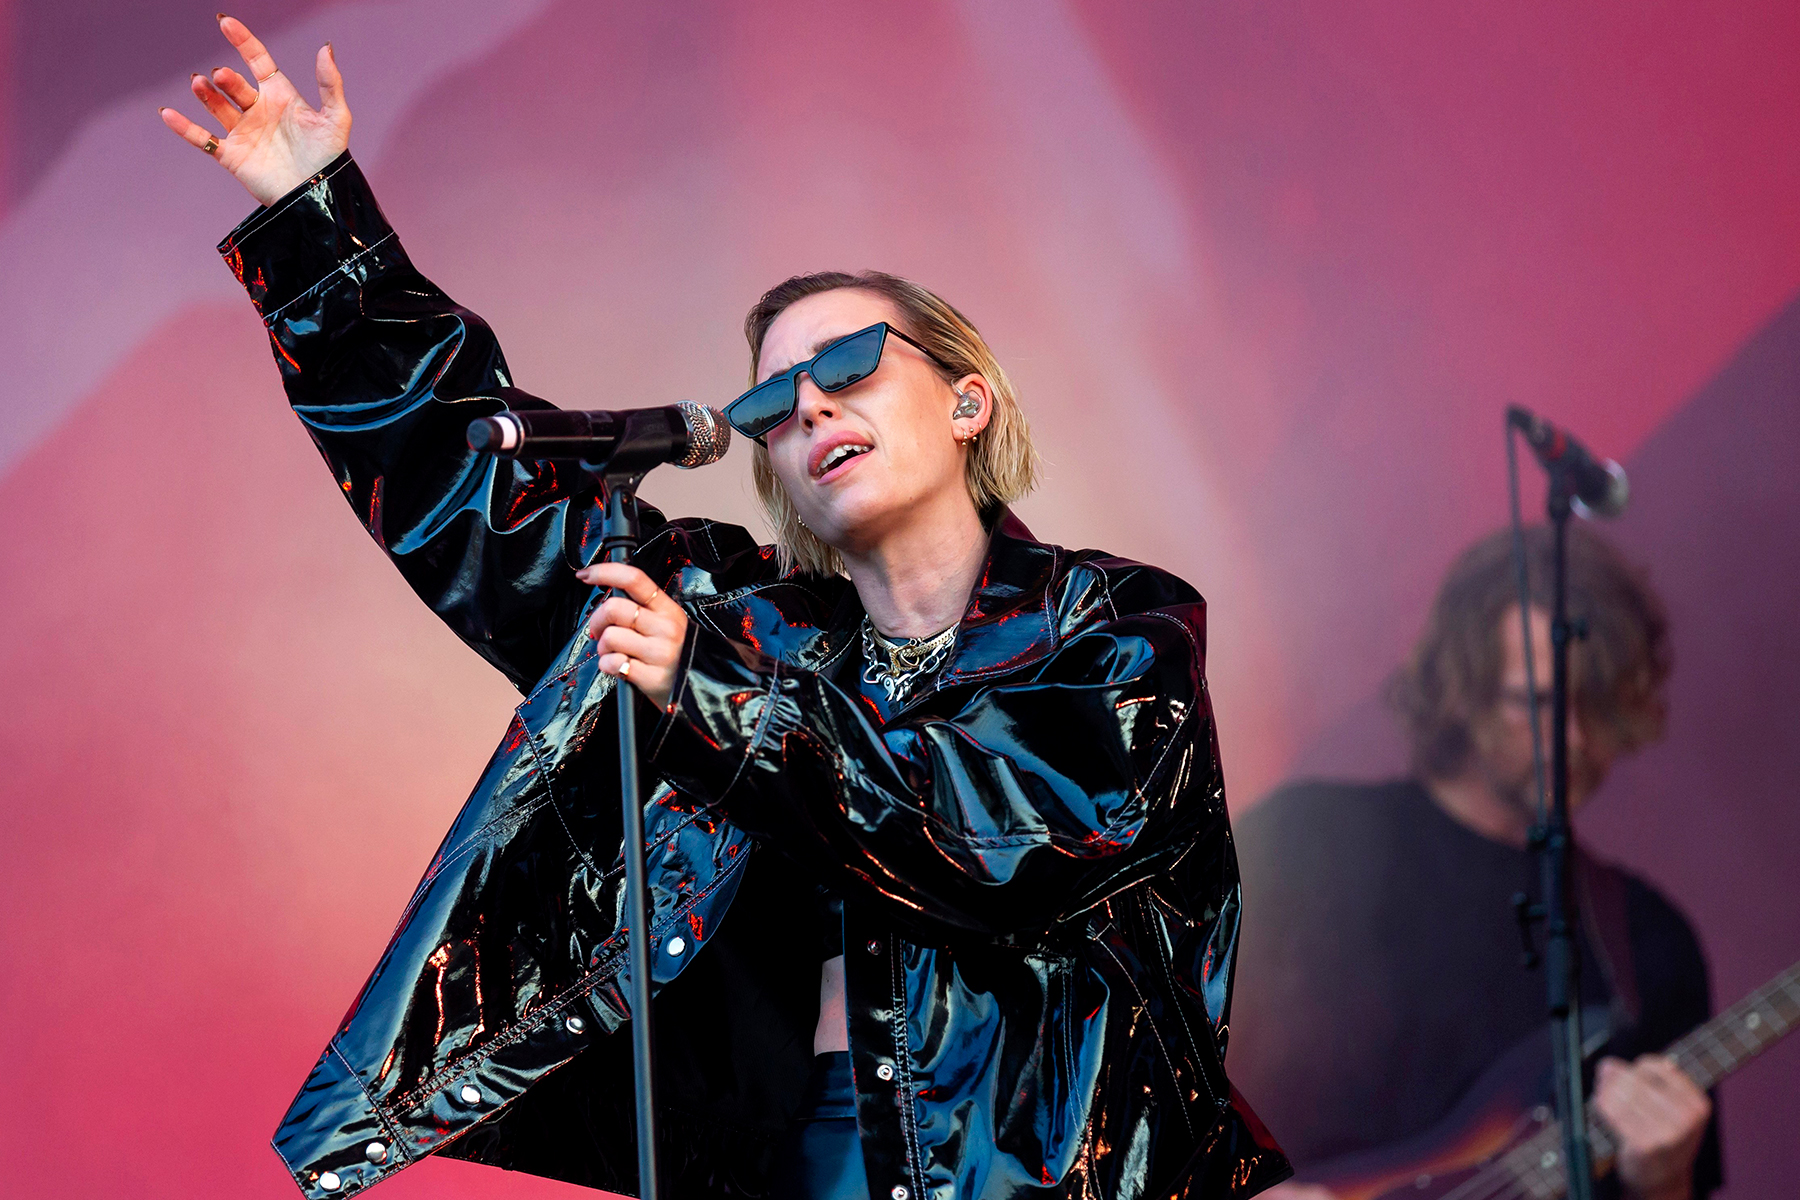 Lykke Li returns with her first song in two years, “No Hotel”,